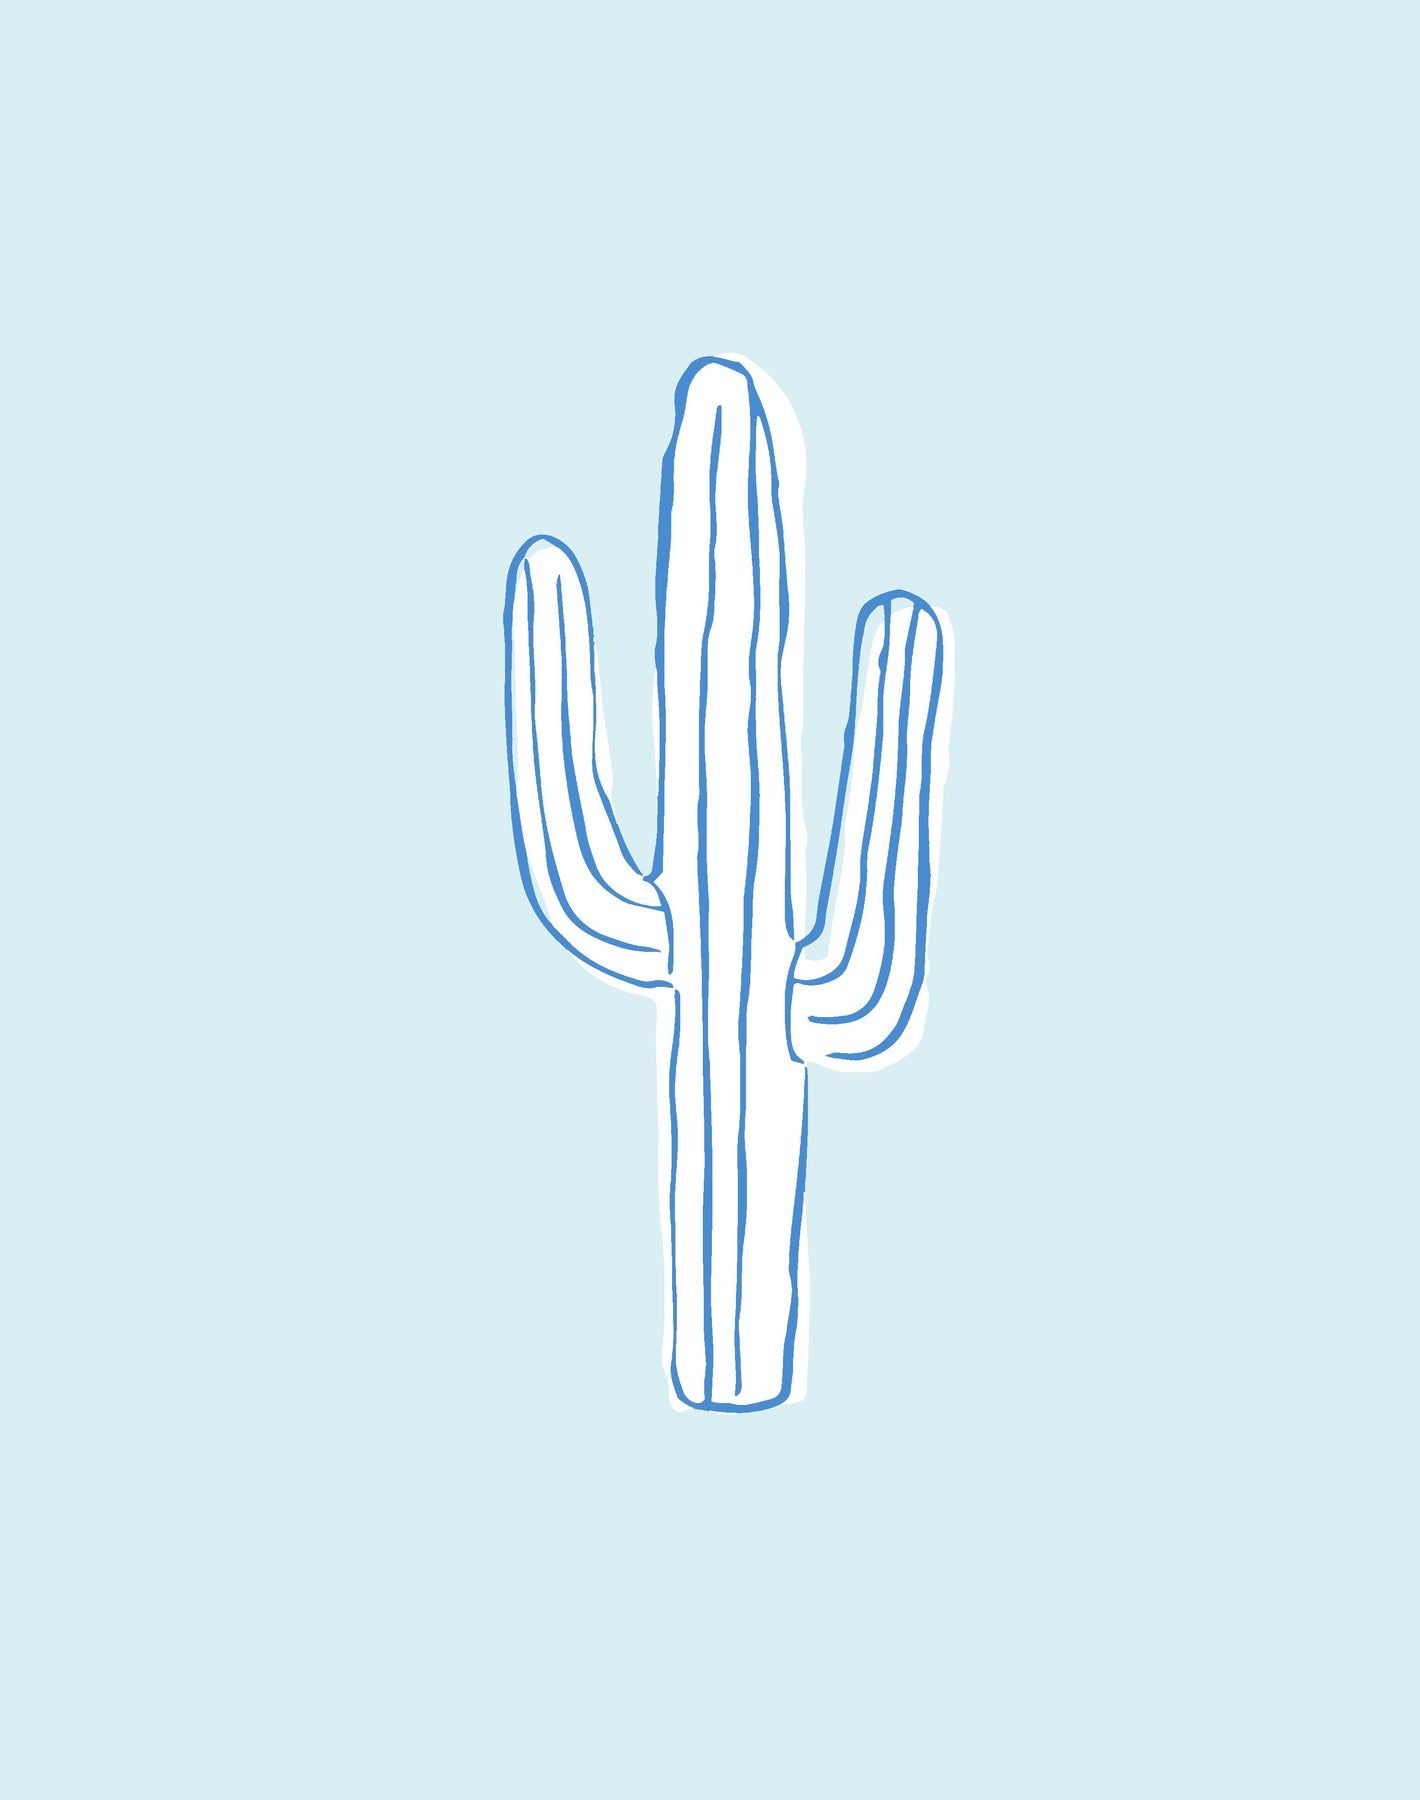 A blue and white cactus on light background - Cactus